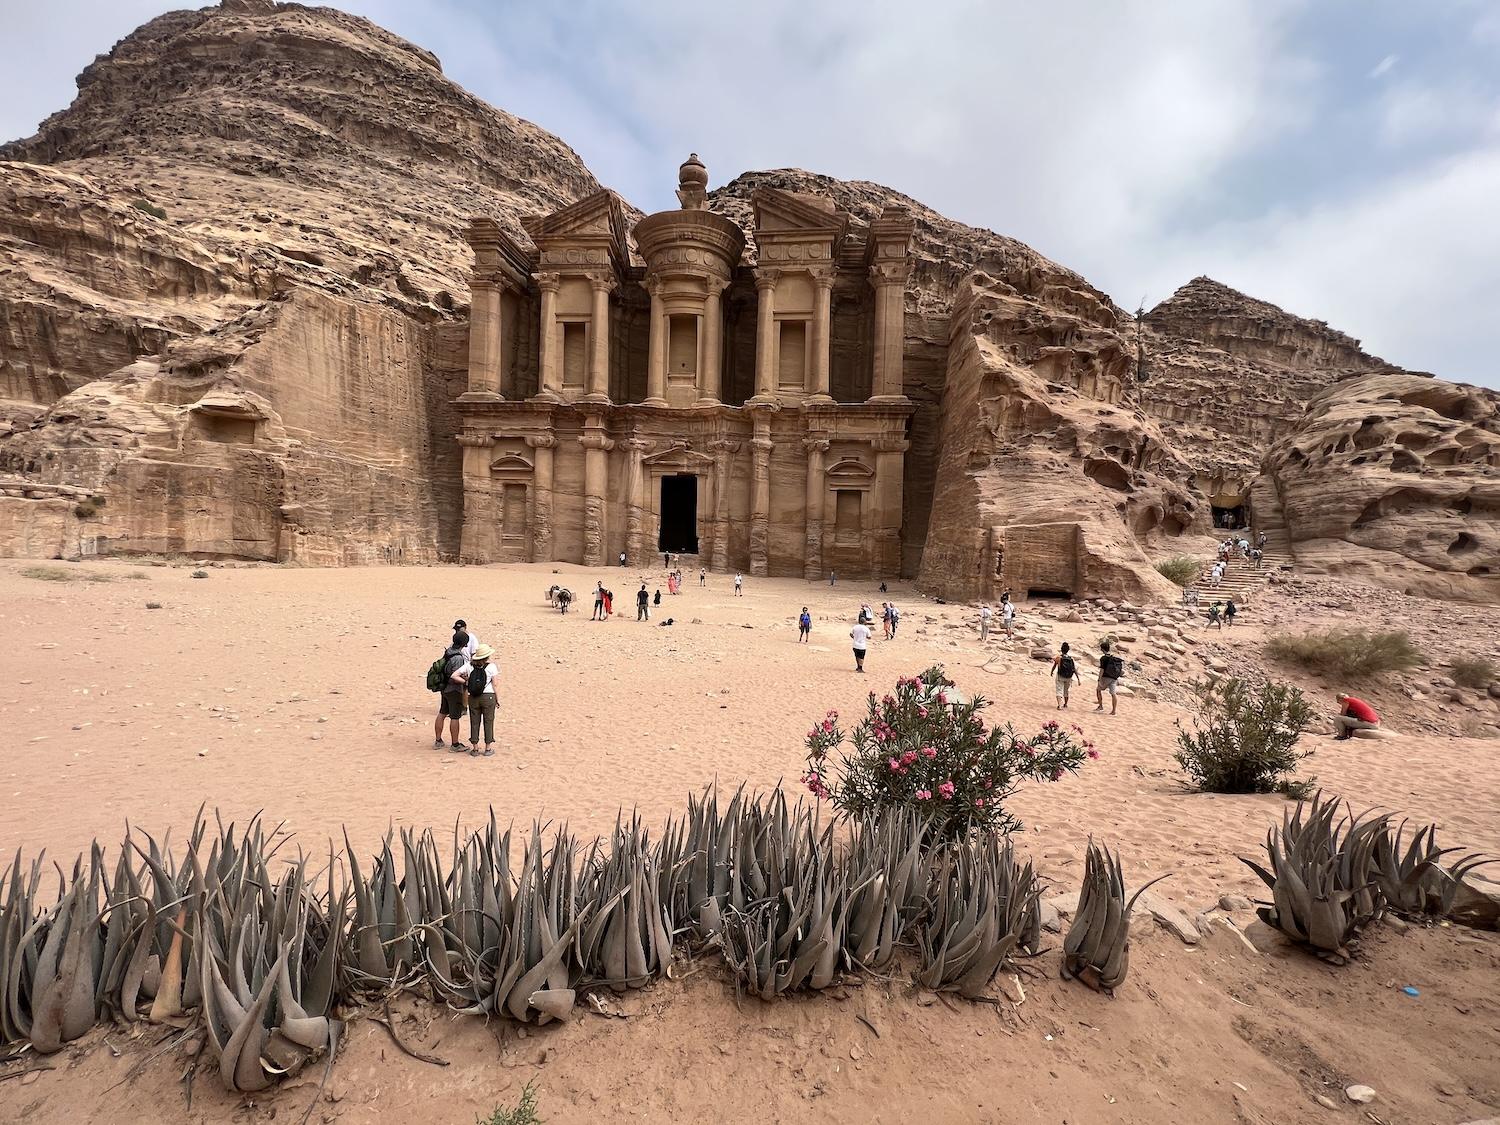 Everybody who visits Jordan goes to Petra to see ancient buildings, like this Monastery, carved out of the rock.